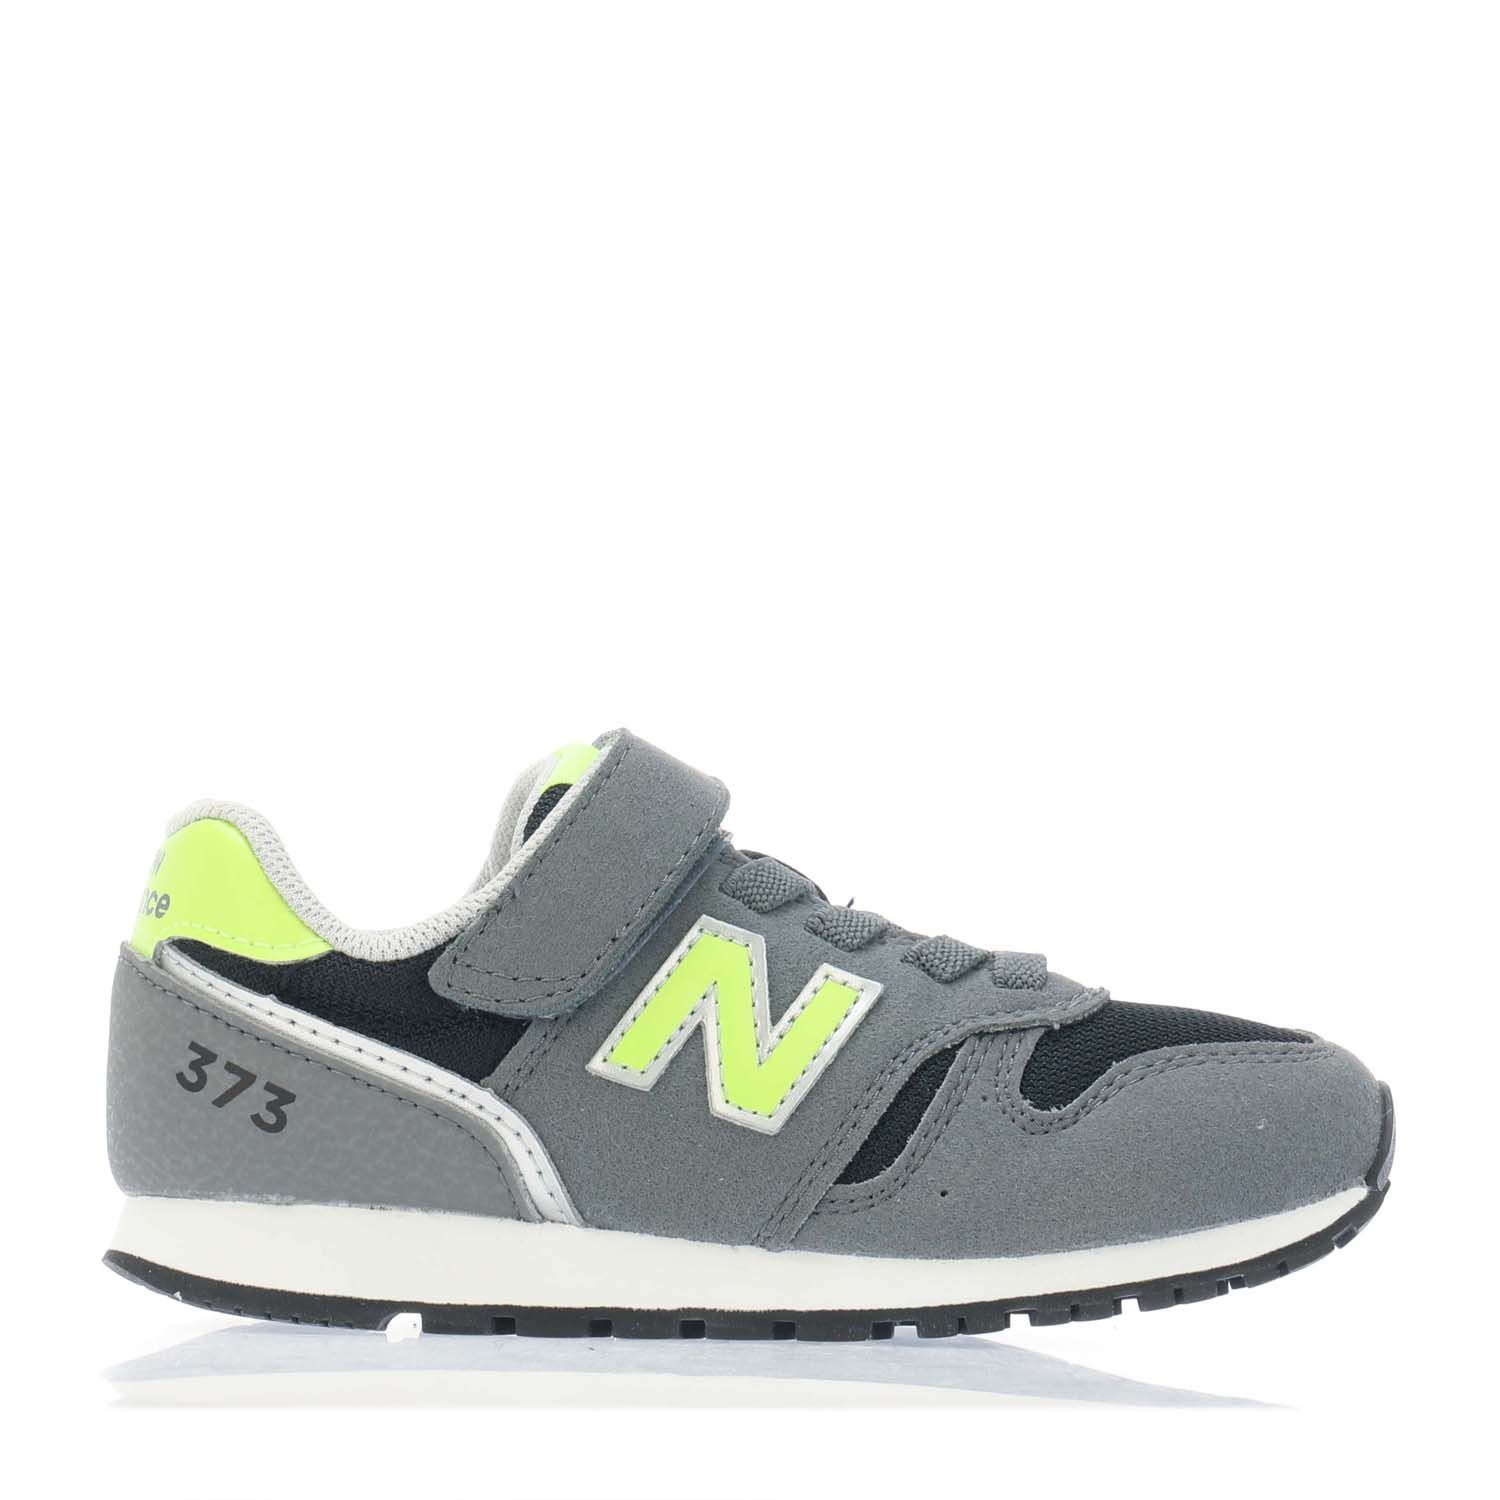 Boys 373 Bungee Lace with Top Strap Trainers